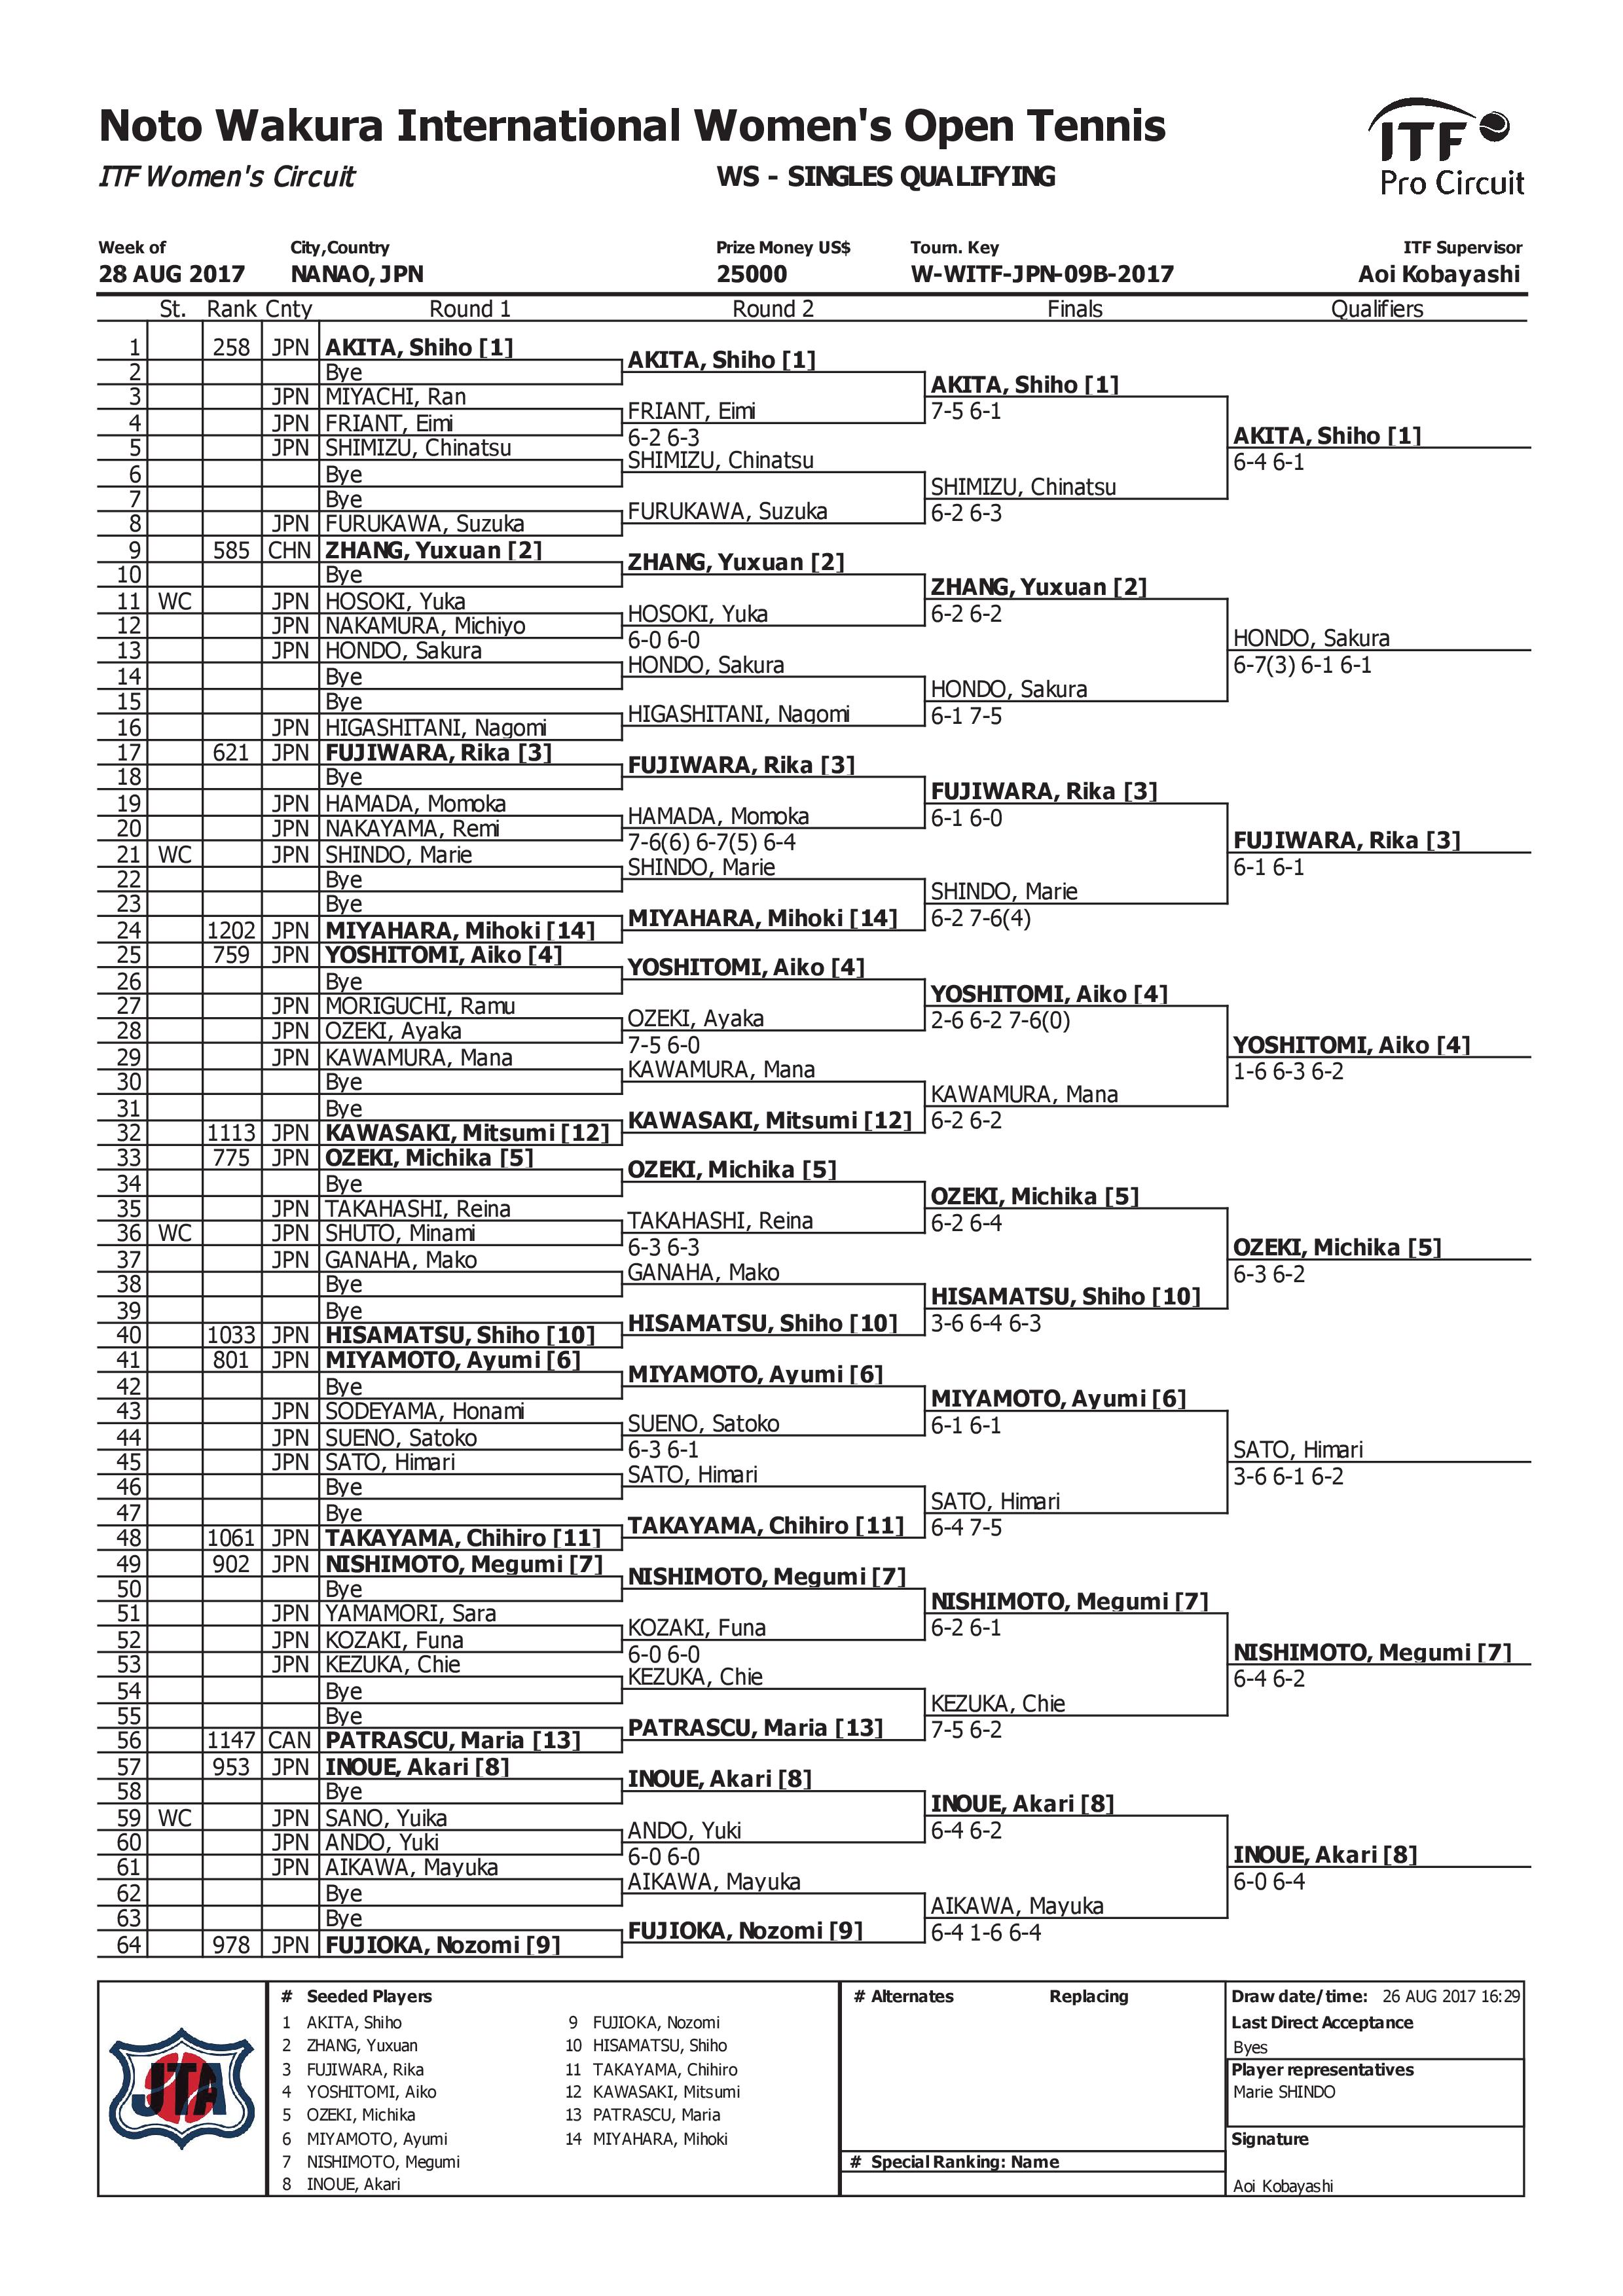 ORDER OF PLAY